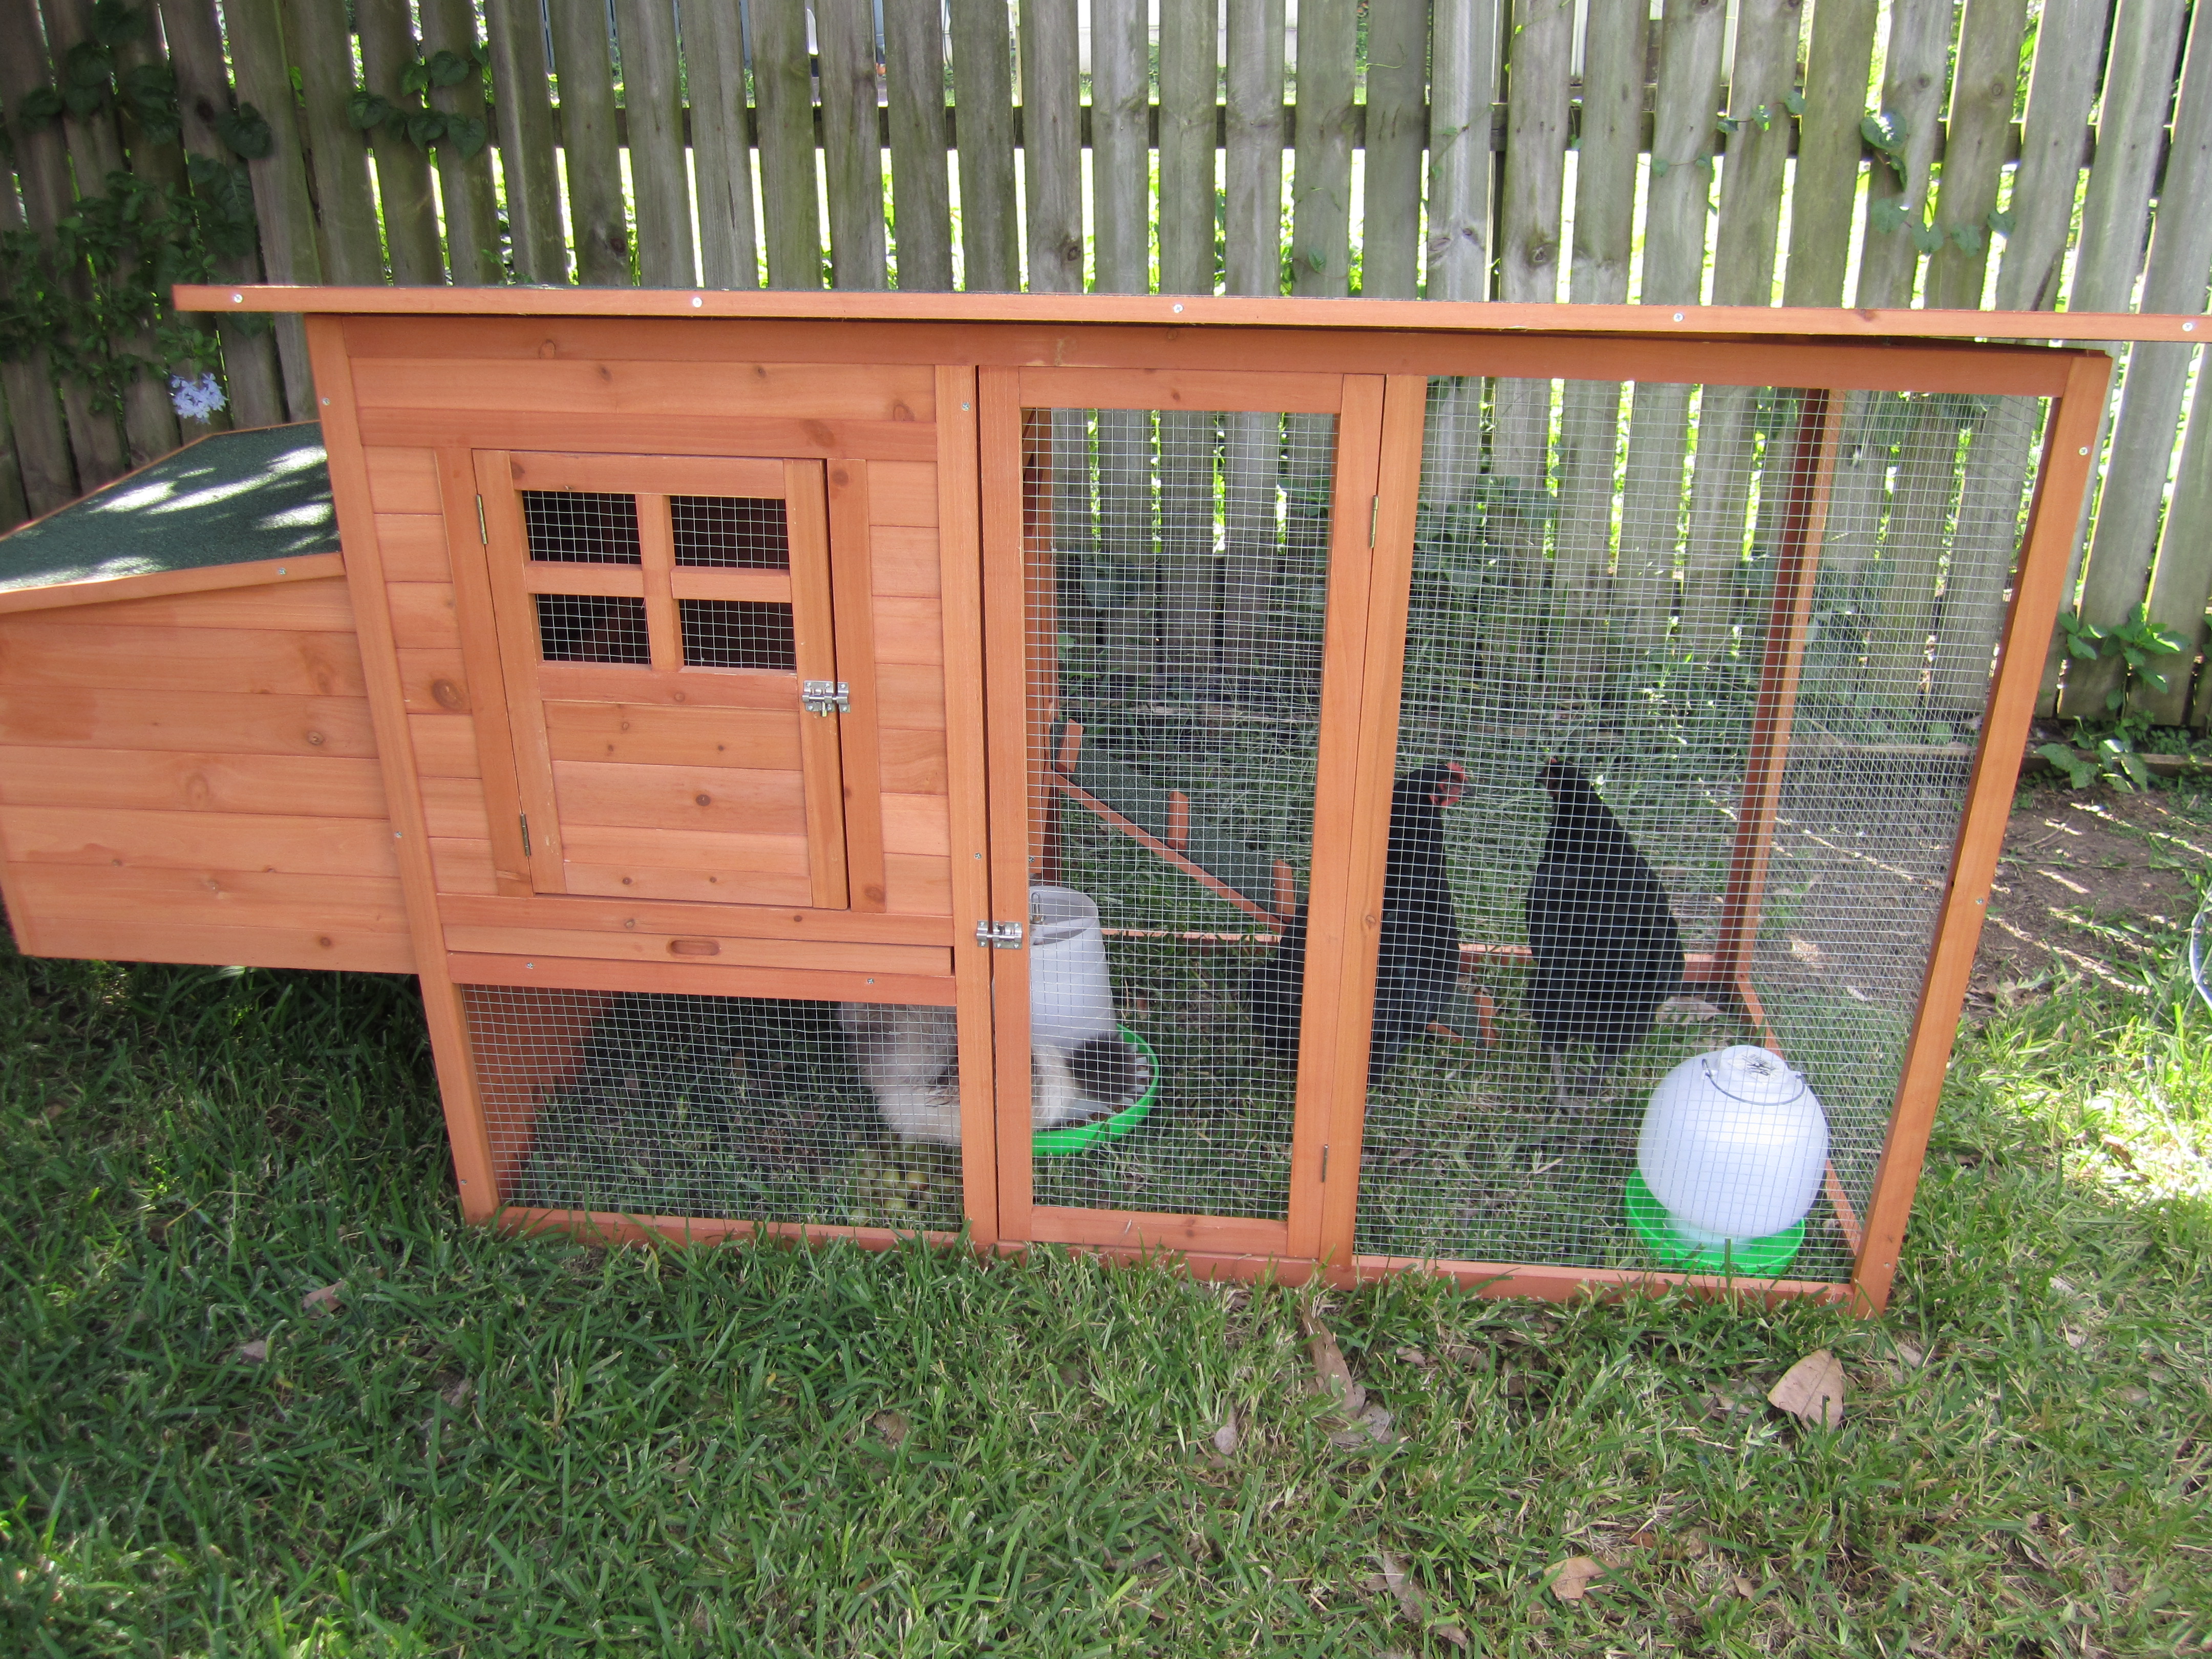 More new additions to our household… Chickens!